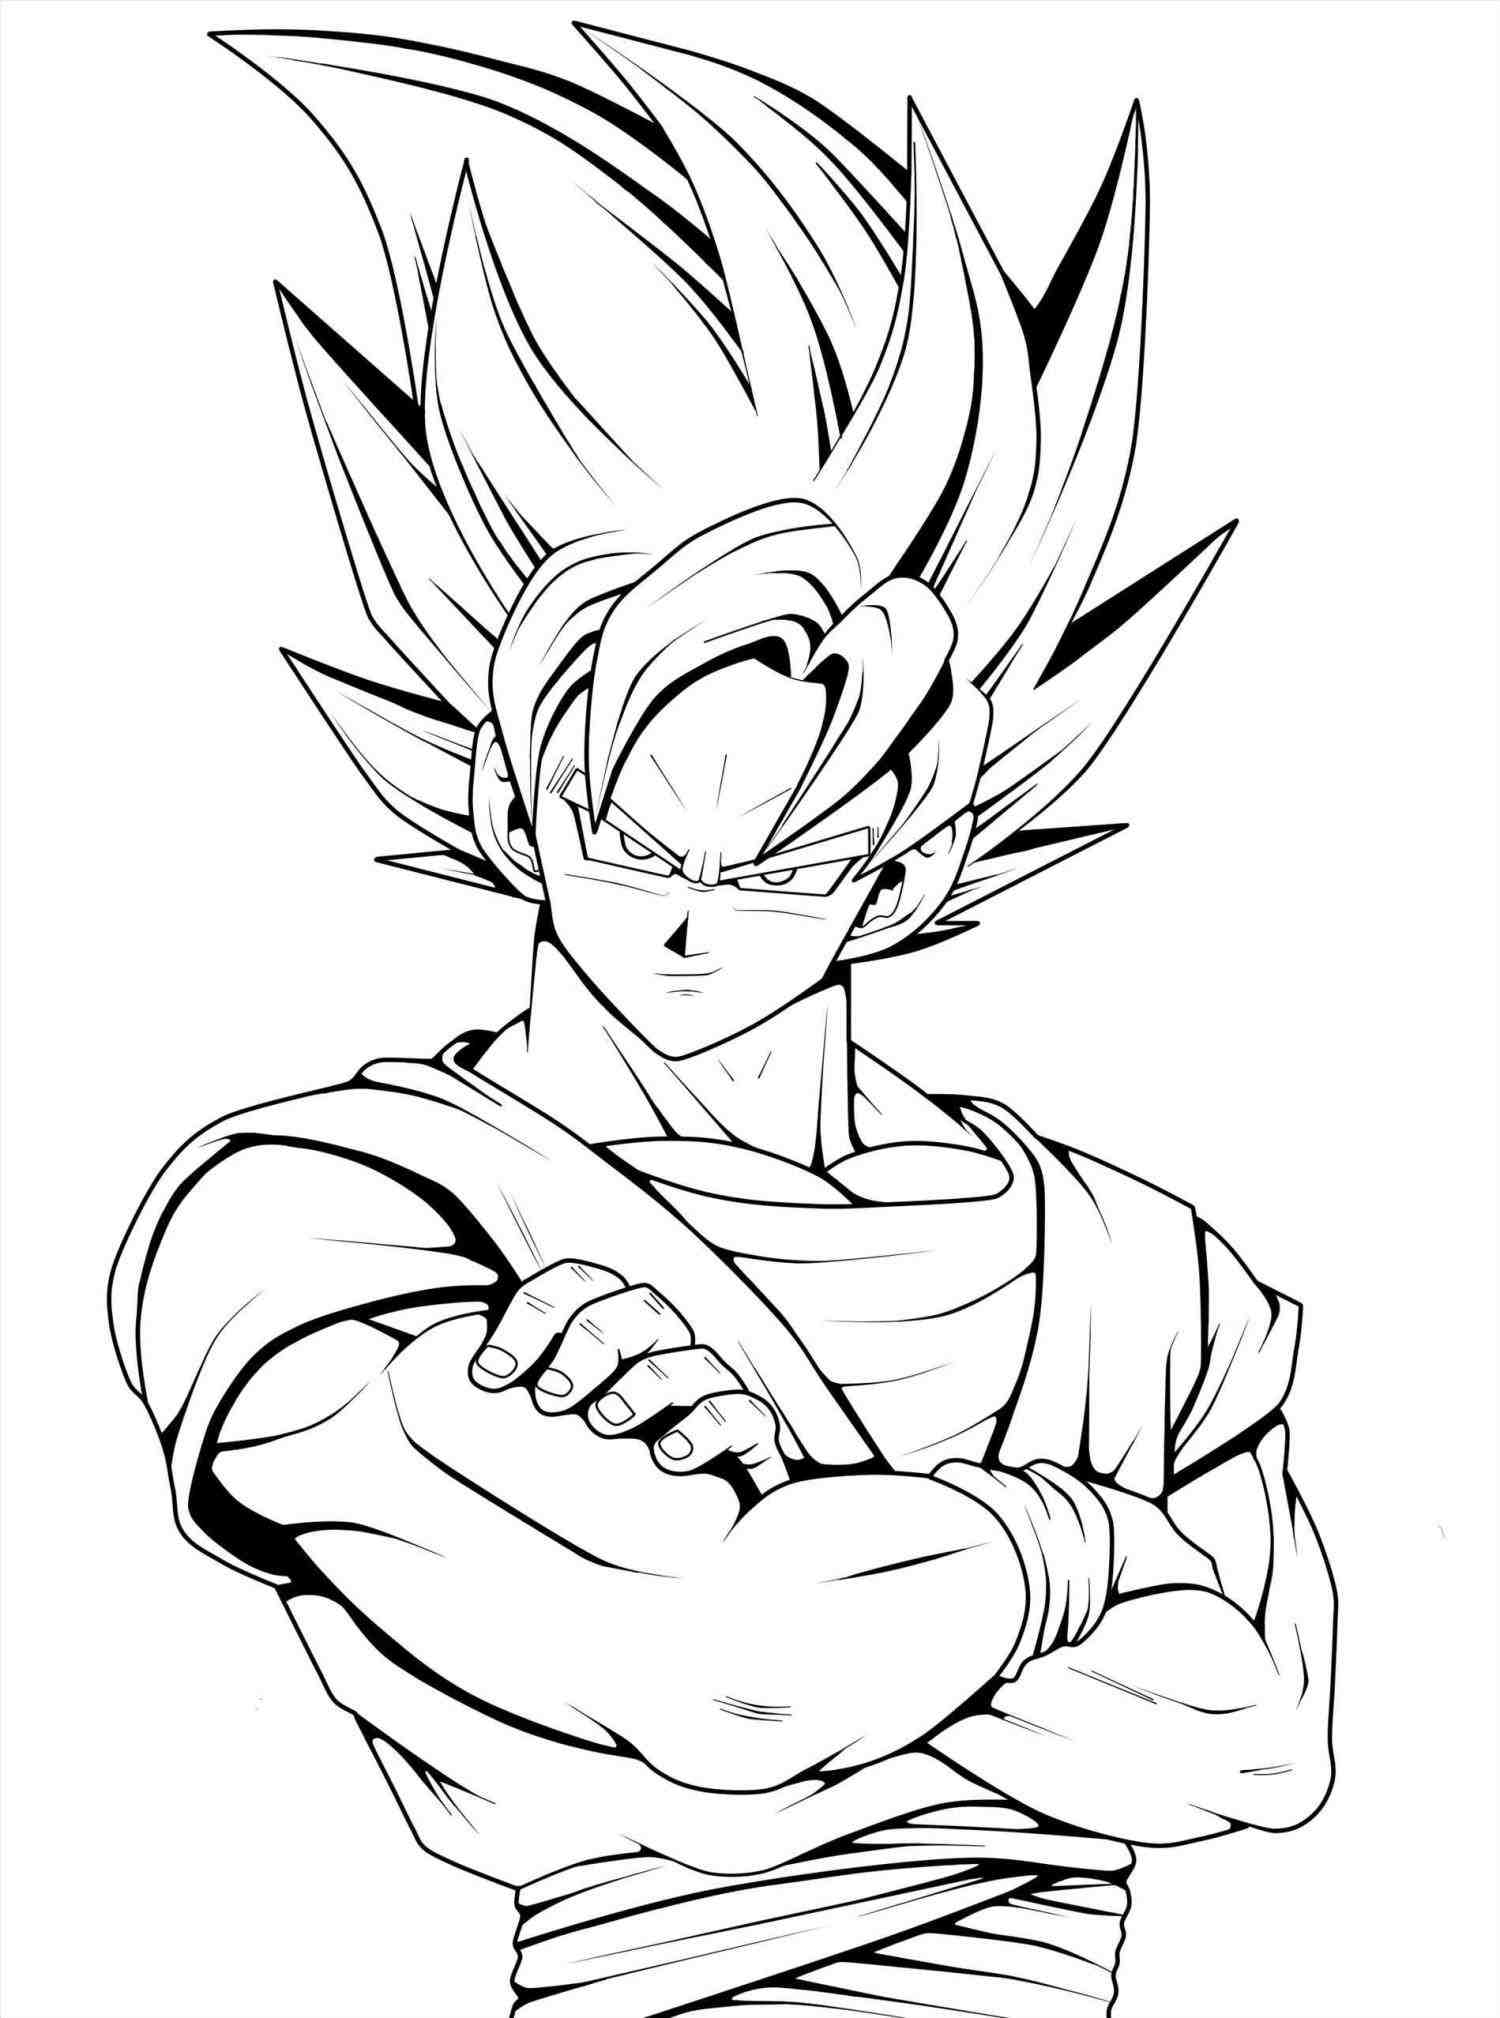 dragon ball z gohan coloring pages dragon ball z gohan coloring page free printable ball dragon coloring gohan z pages 